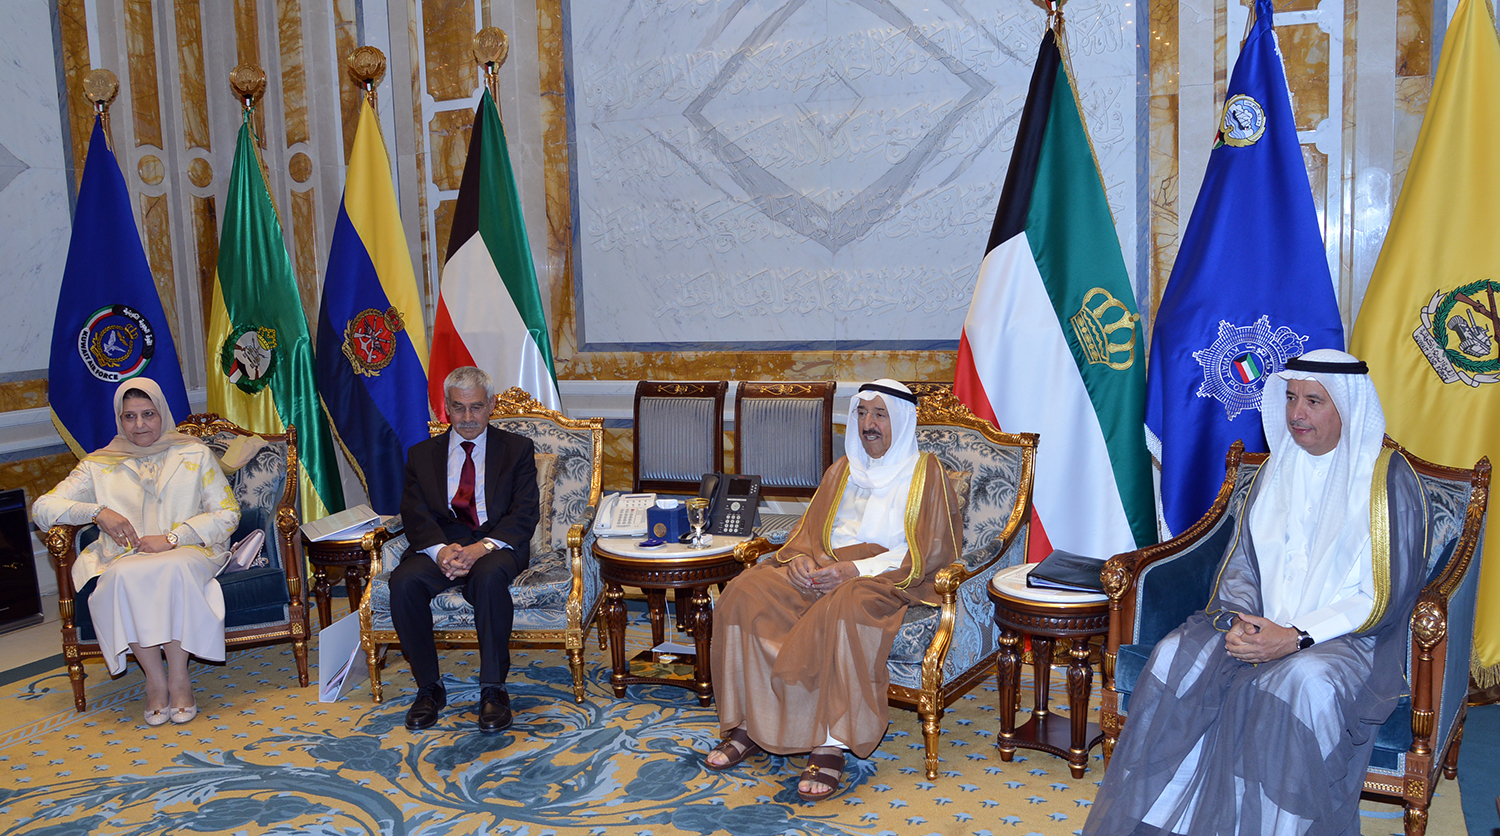 His Highness the Amir Sheikh Sabah Al-Ahmad Al-Jaber Al-Sabah received Director General of the Kuwait Foundation for the Advancement of Sciences (KFAS) Dr. Adnan Shihab Eldin and members of Board of Directors